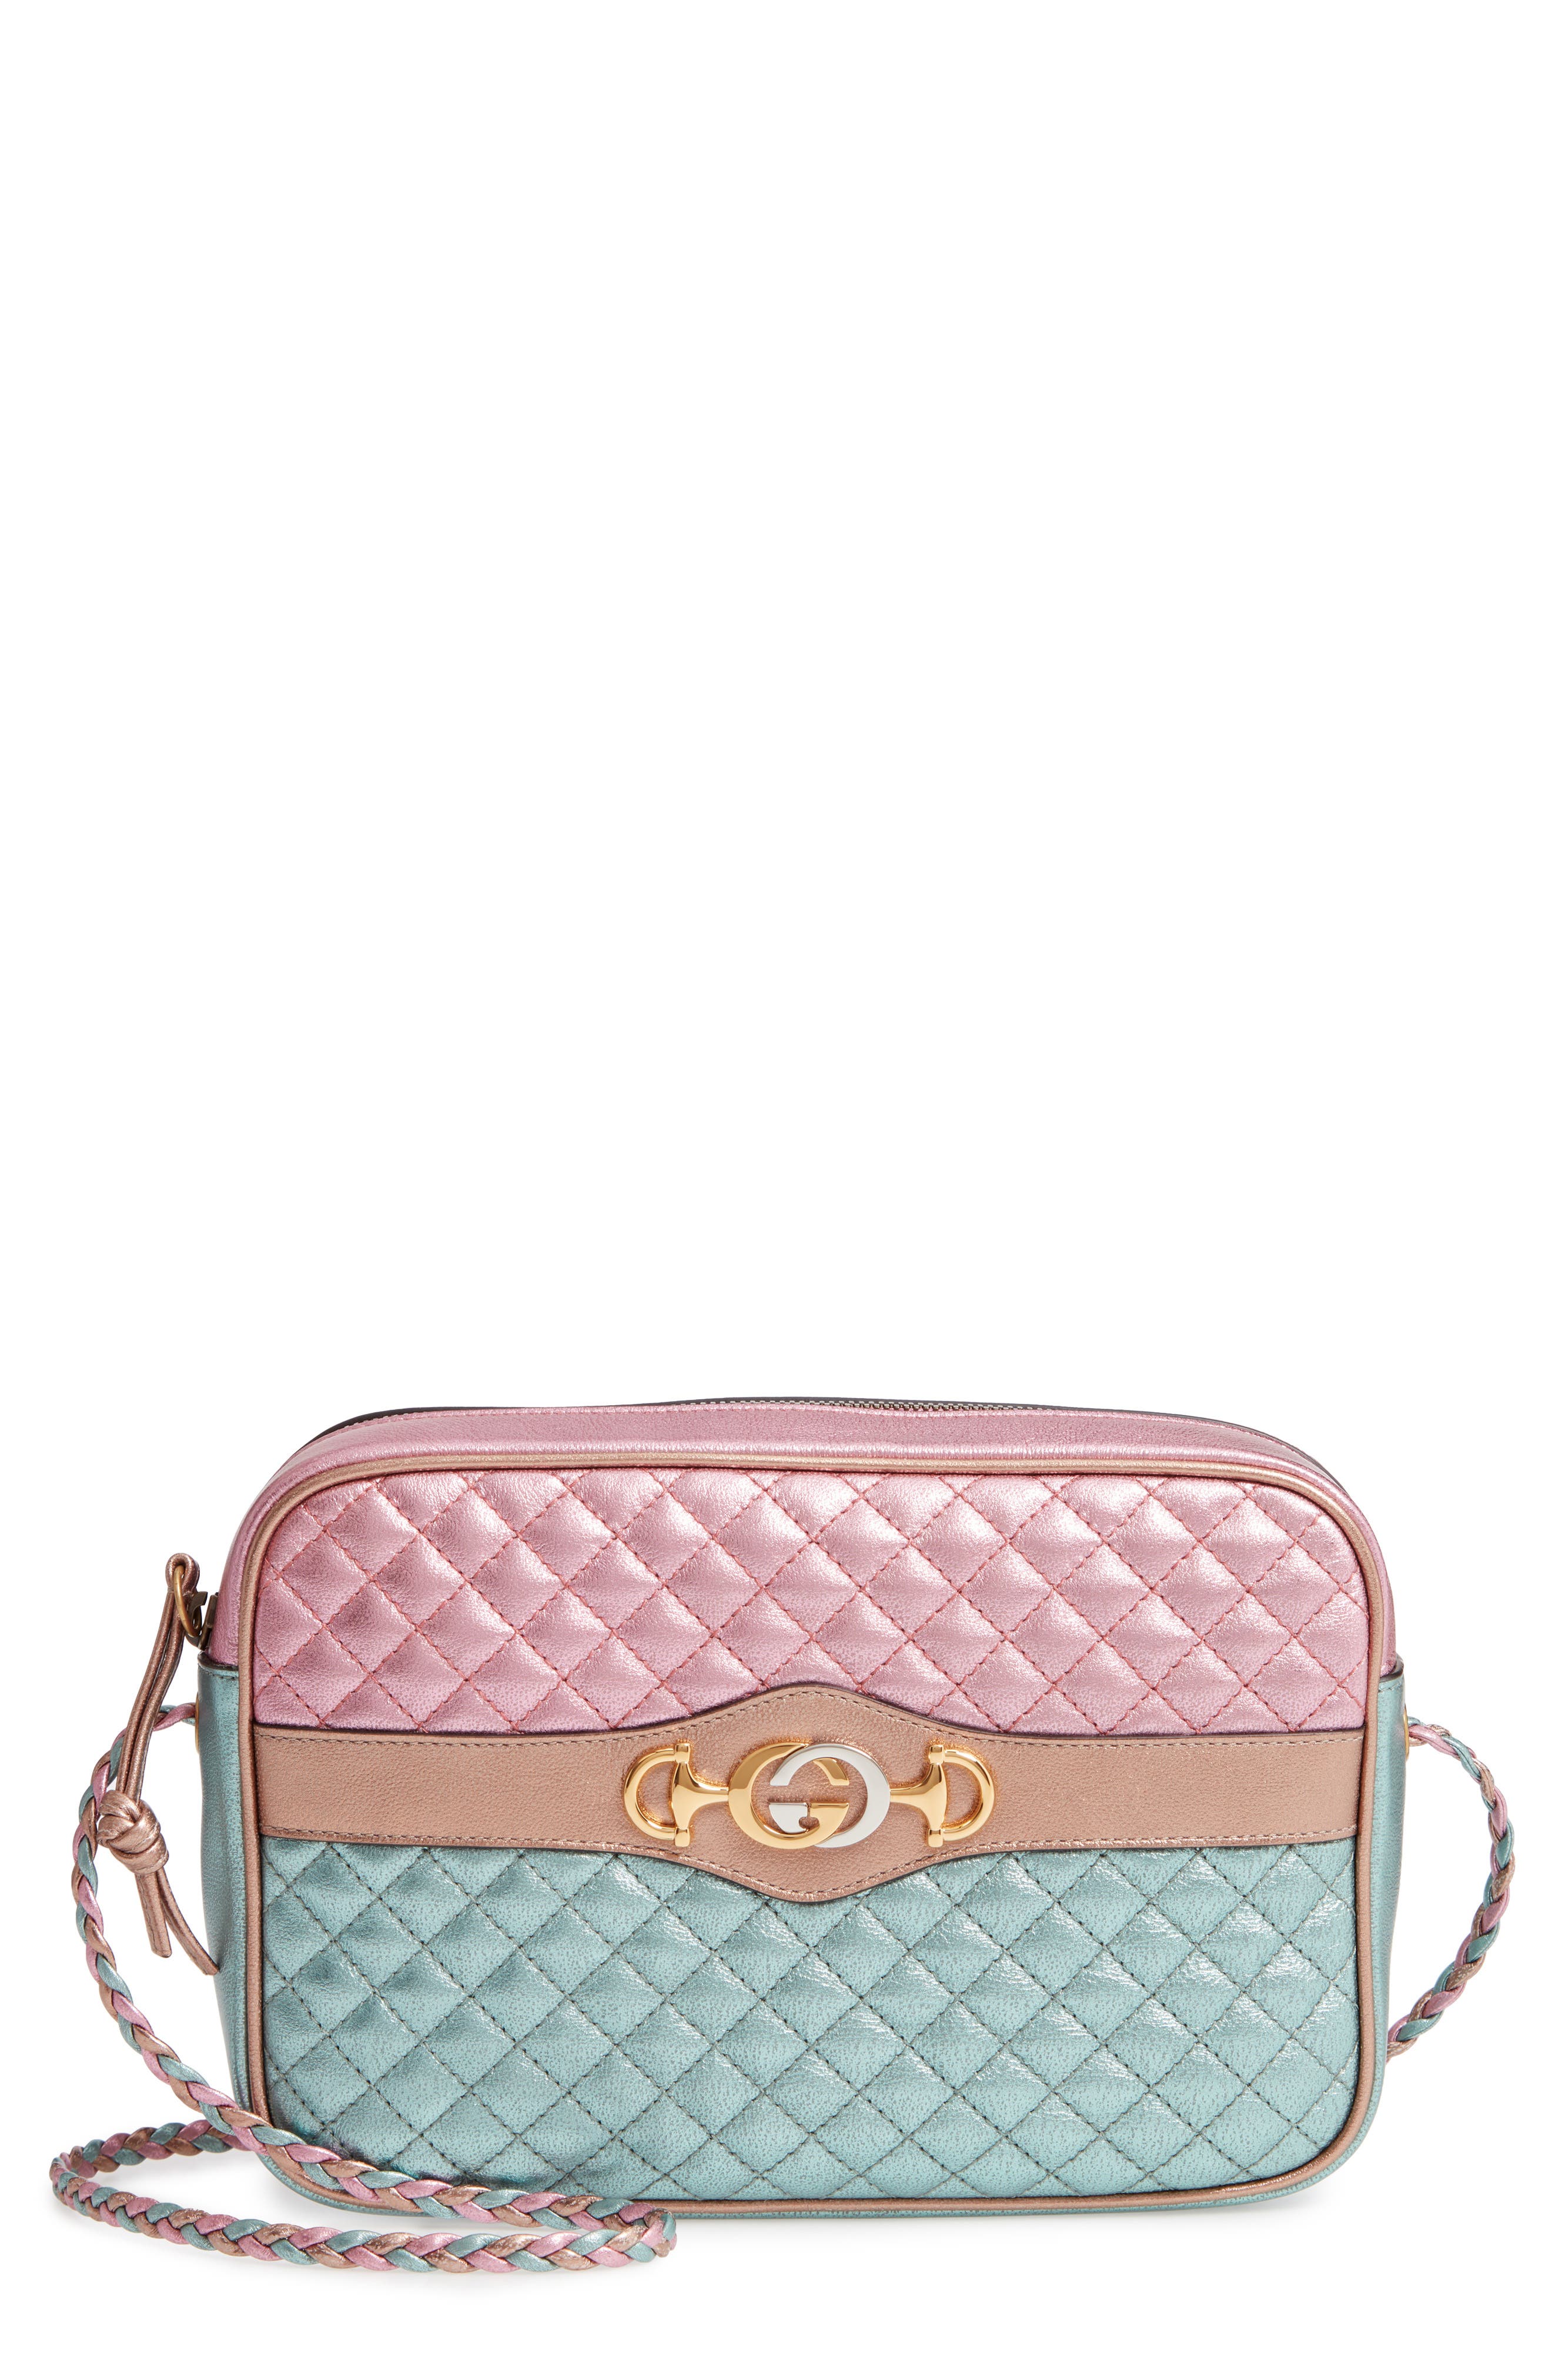 gucci quilted bag